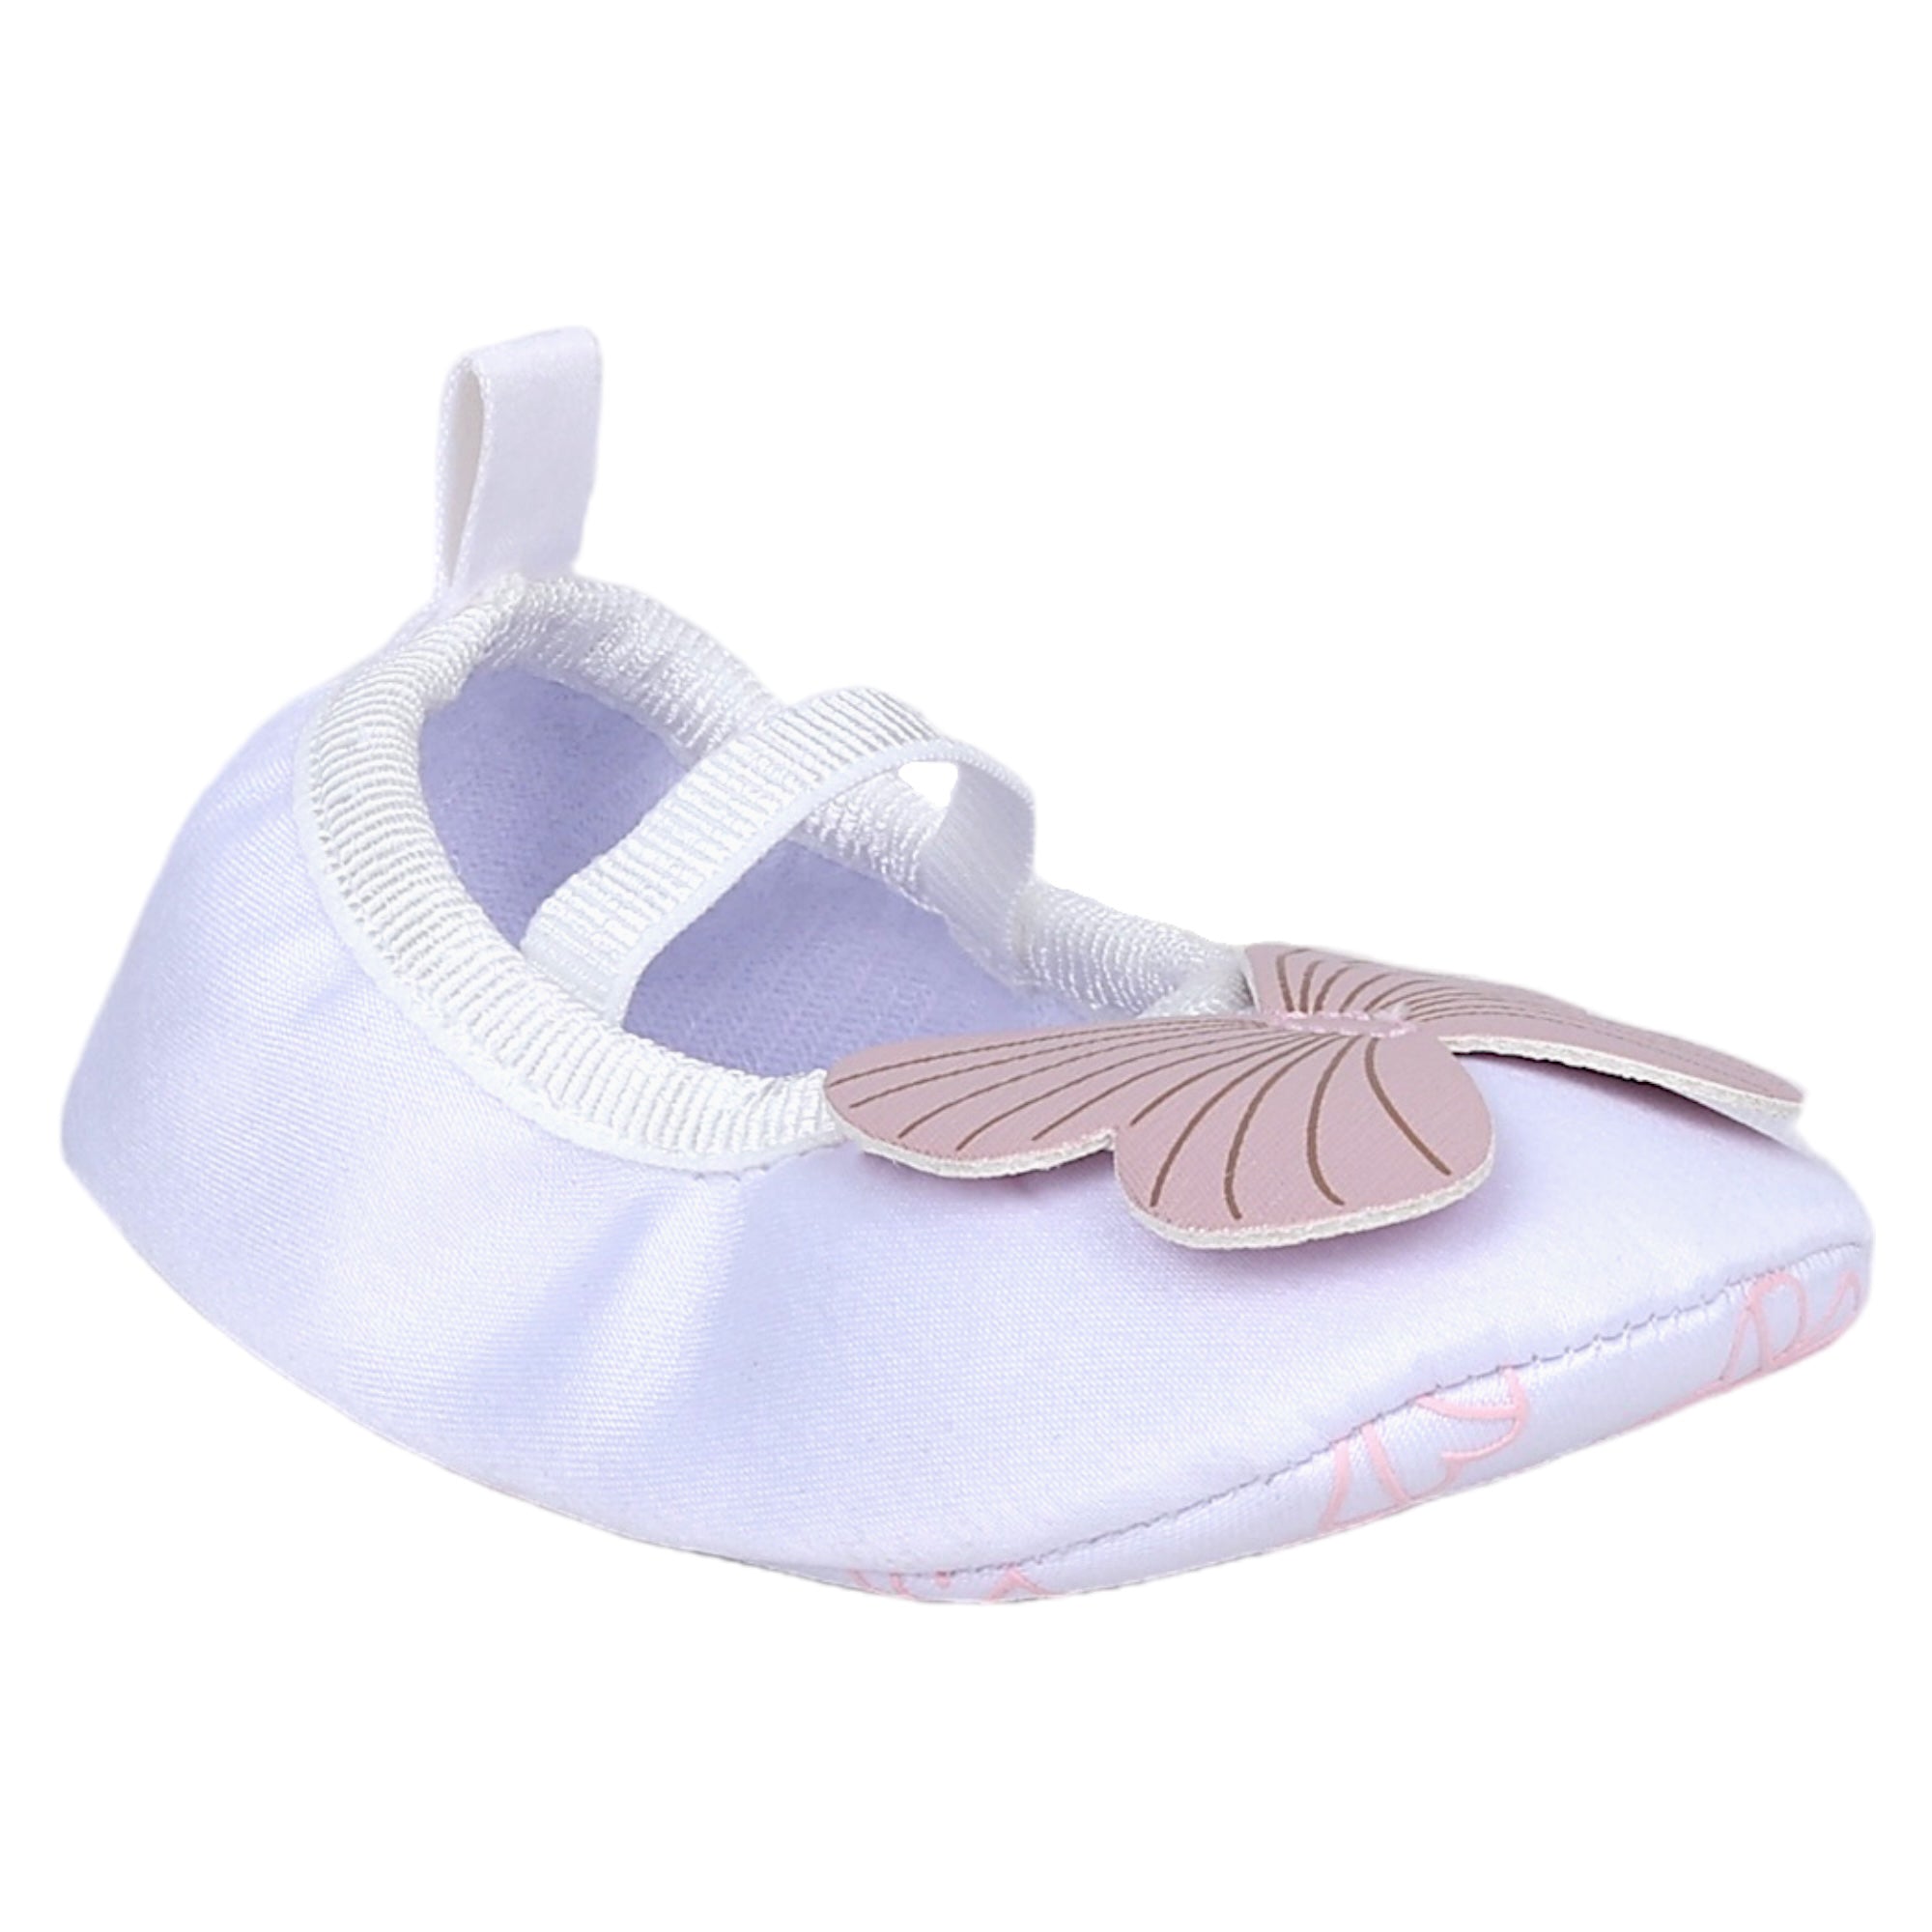 Baby Moo Butterfly Applique Elastic Strap Anti-Skid Ballerina Booties - White